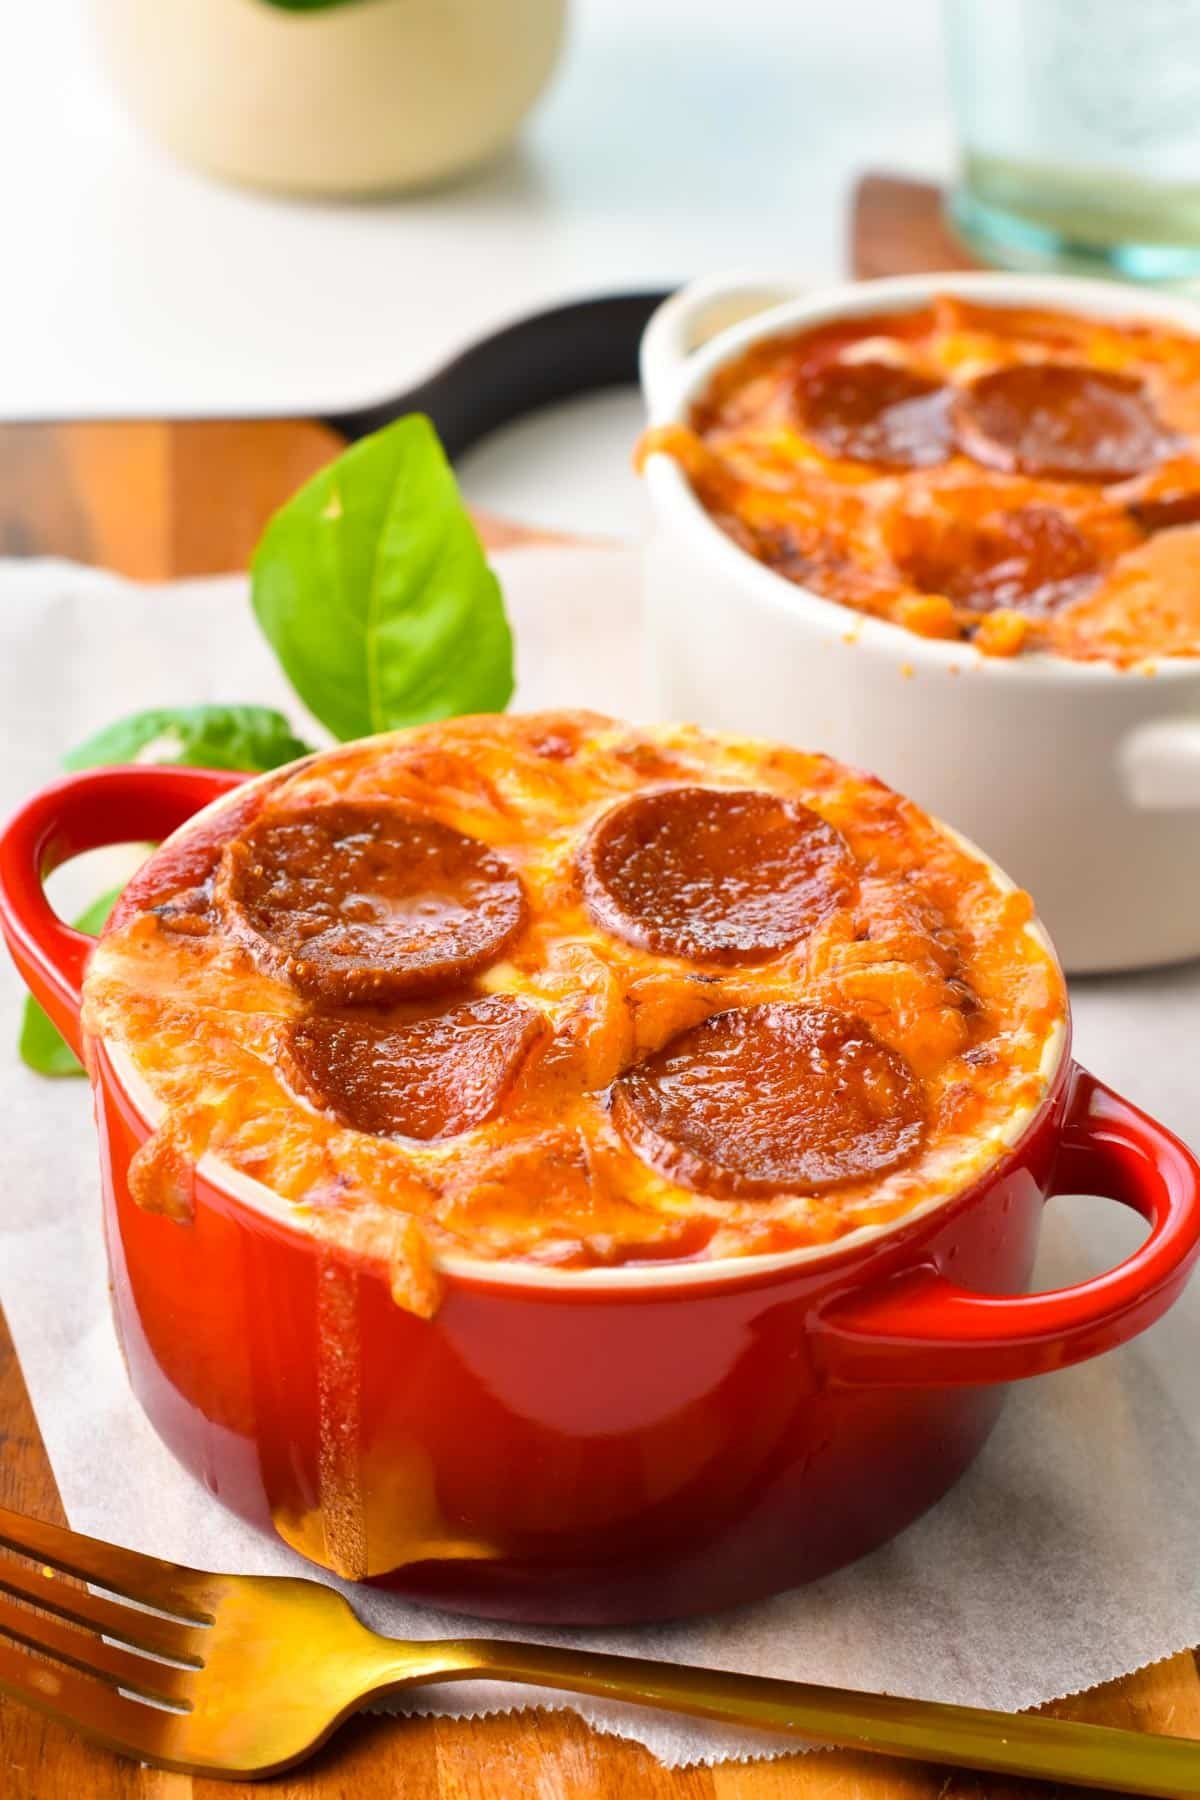 A red ramekin with baked cottage cheese, grated grilled mozzarella and pepperoni slices.